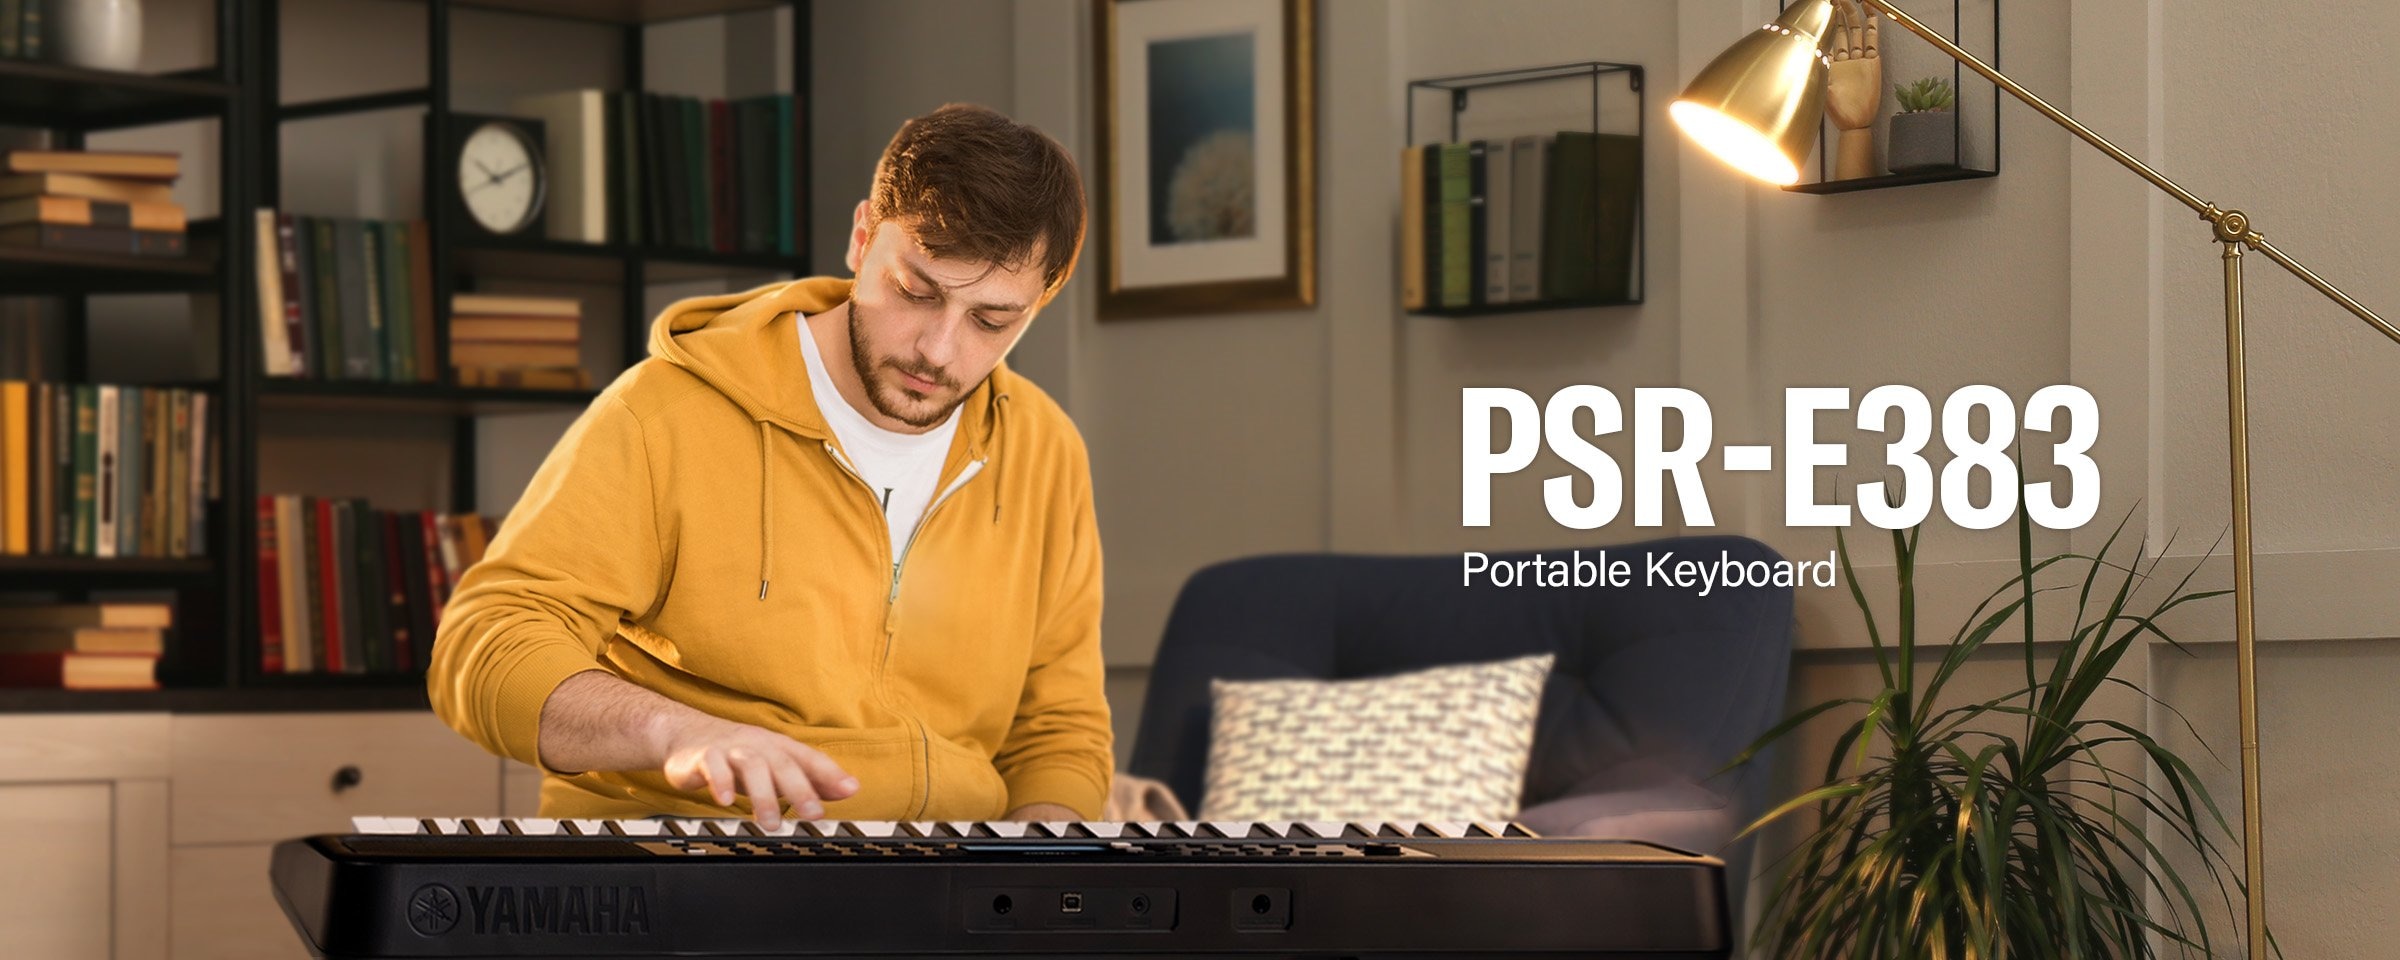 The man is playing the PSR-E383 enthusiastically.